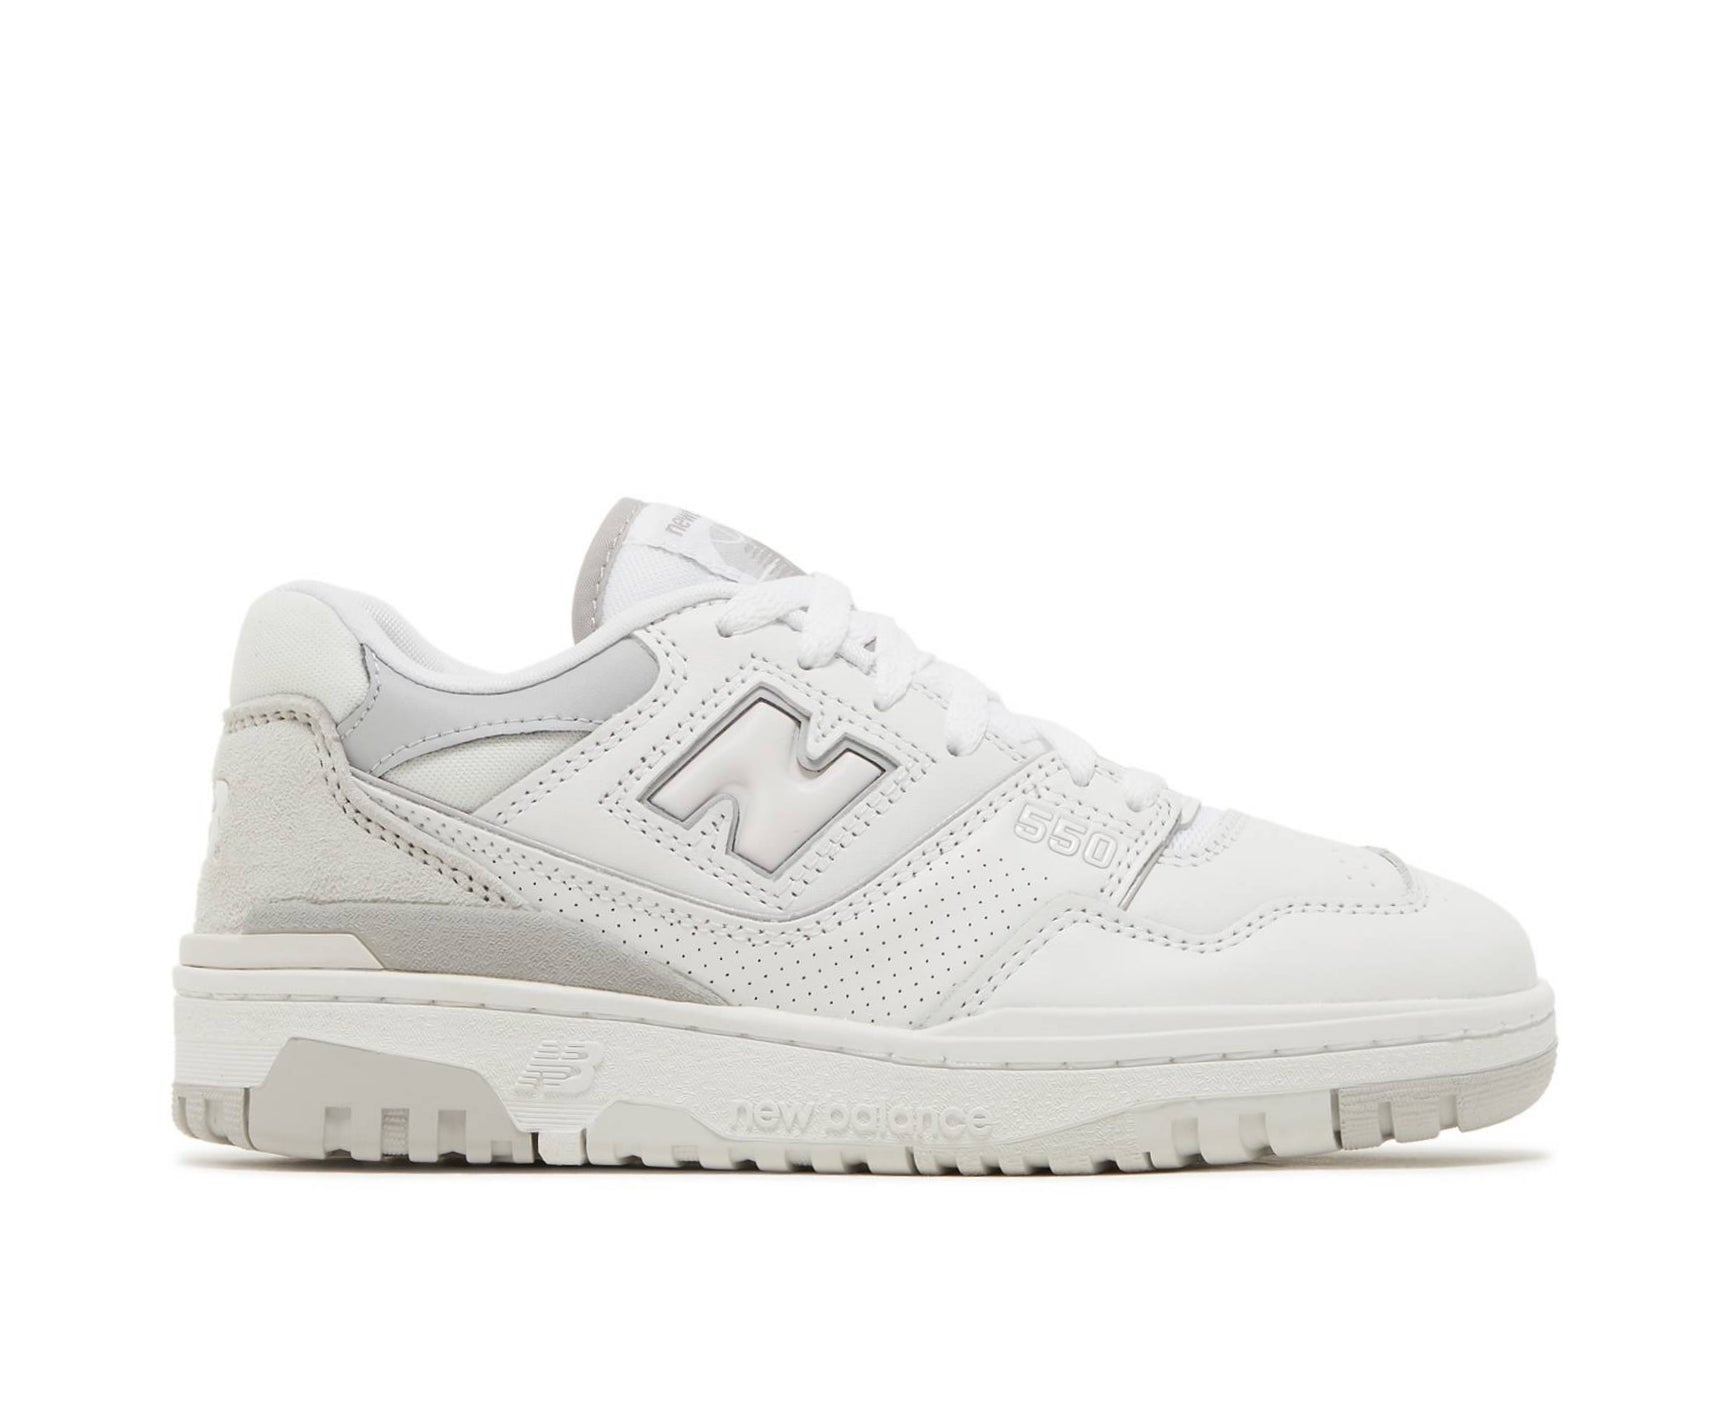 A white leather basketball sneaker from New Balance.